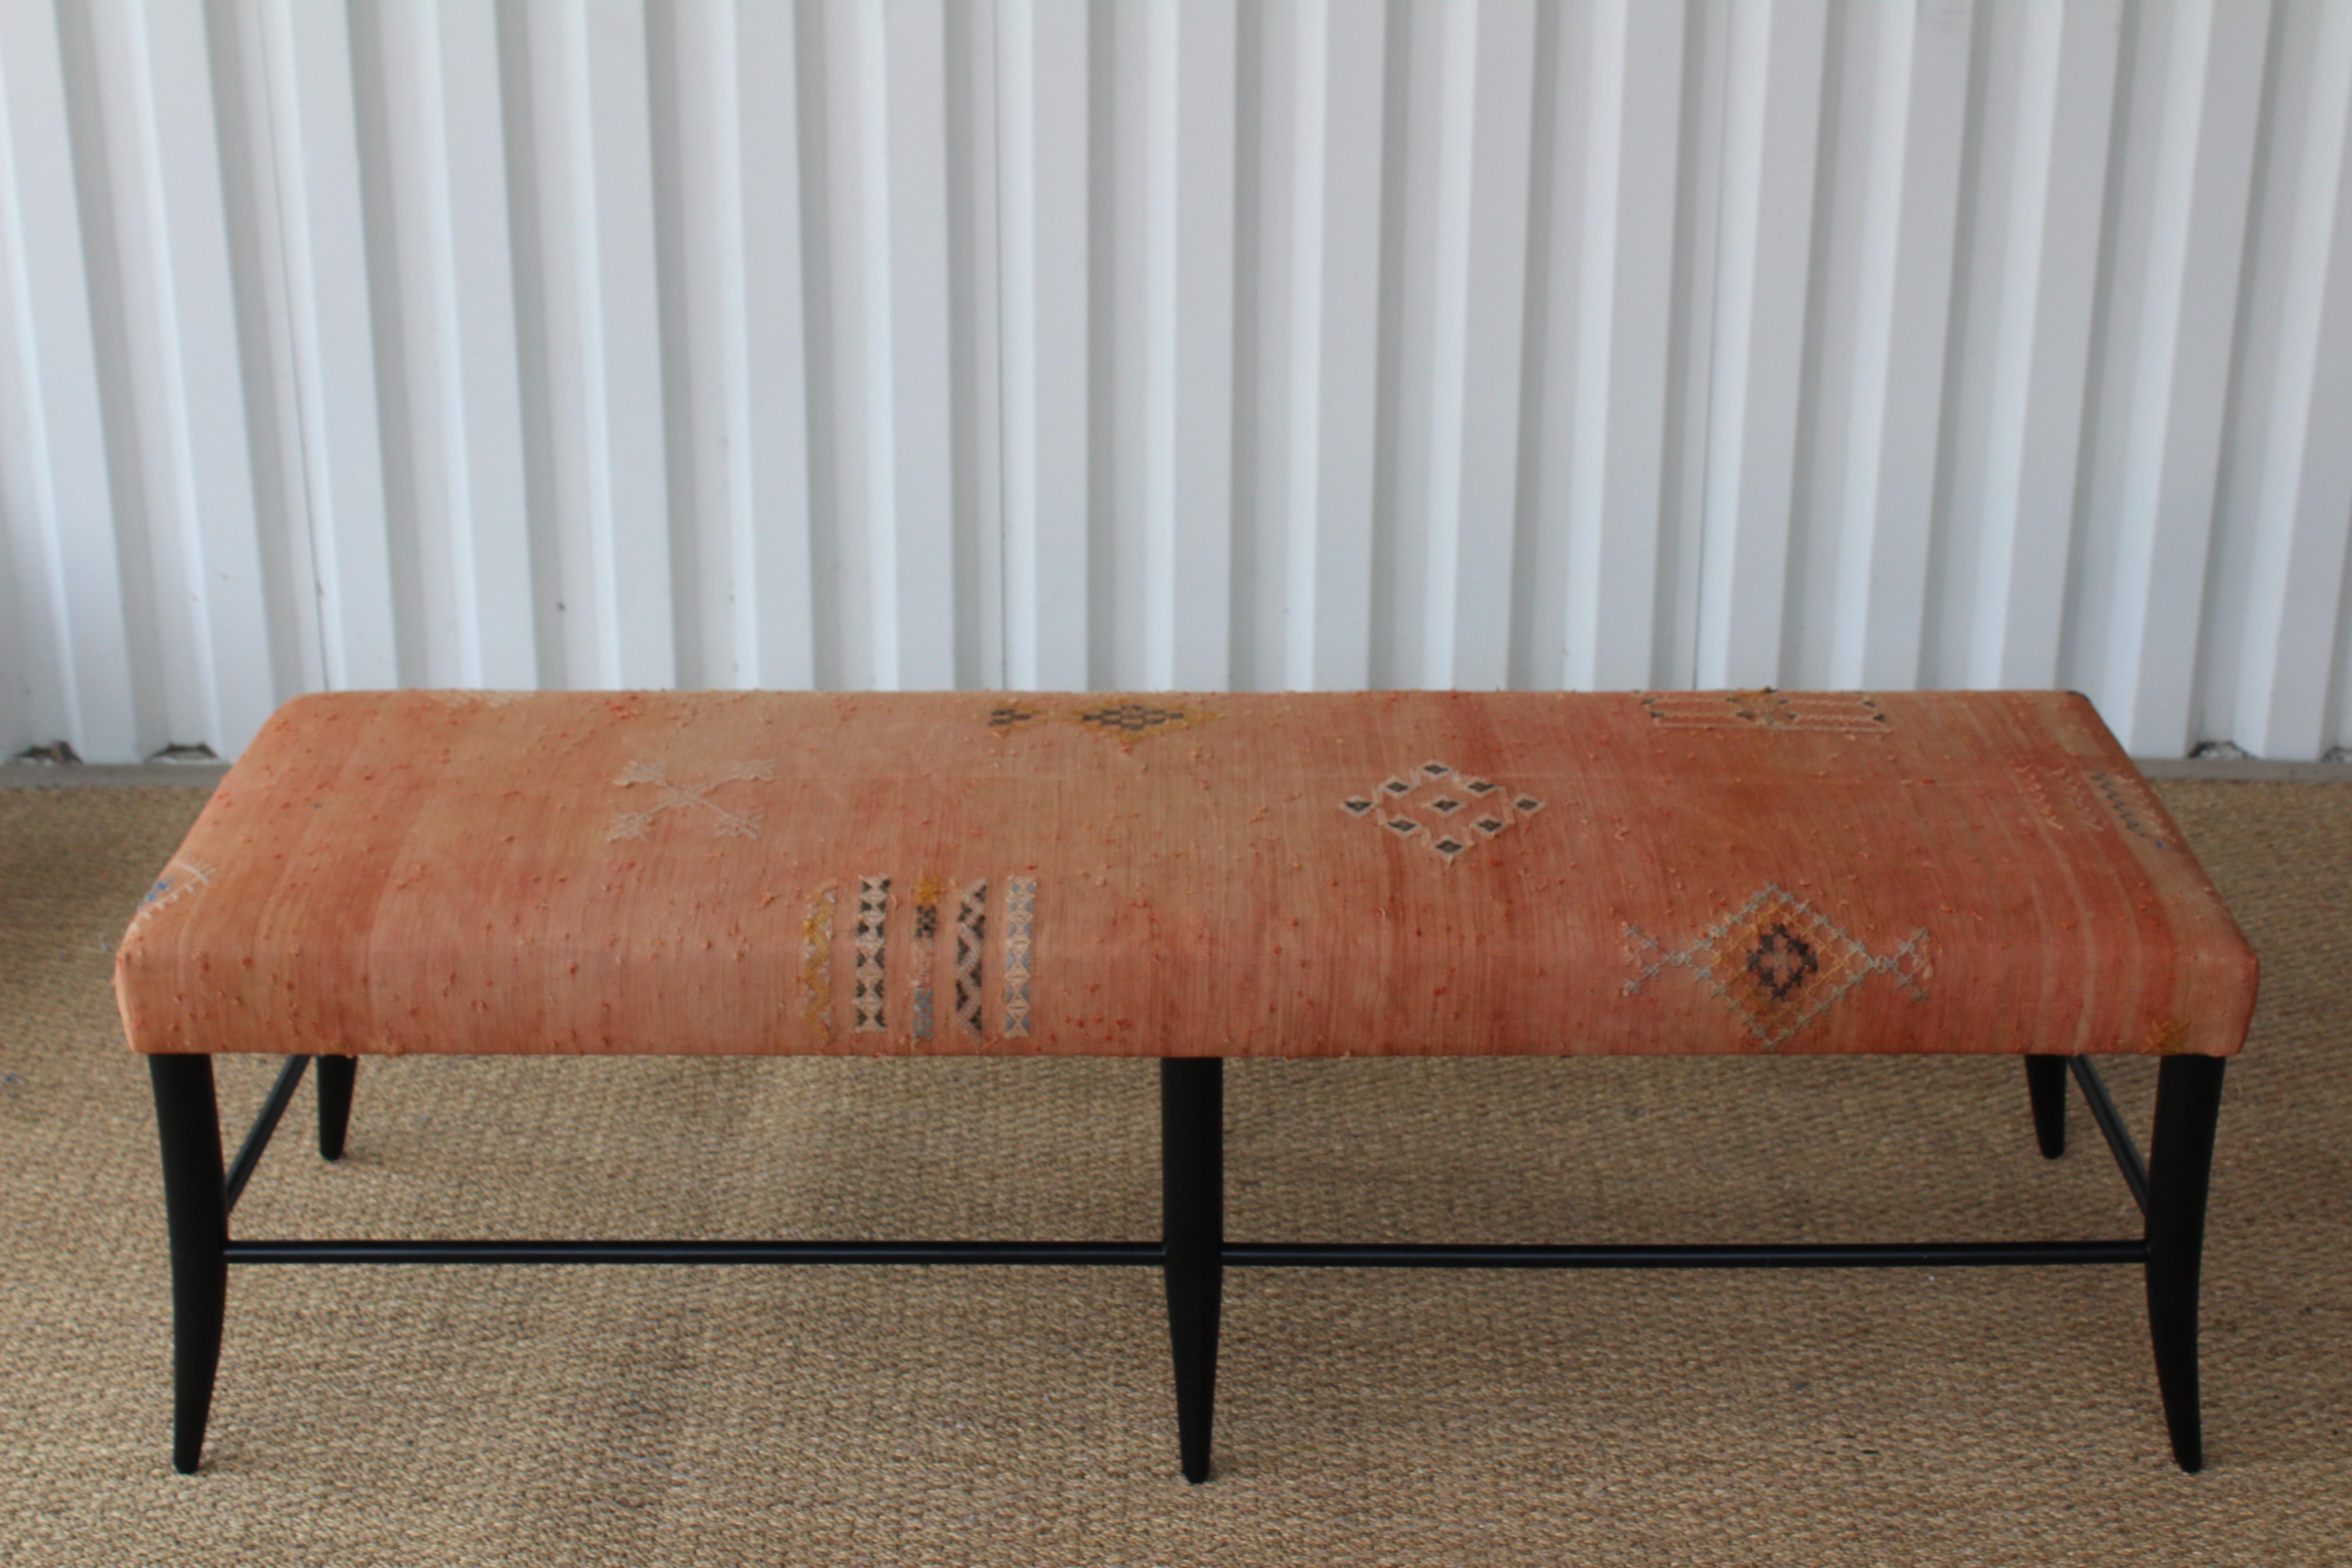 Custom made Croft bench, upholstered in a vintage Turkish textile. Handcrafted in Los Angeles. Wood base has satin black finish. In overall excellent condition. Rug shows age appropriate wear.